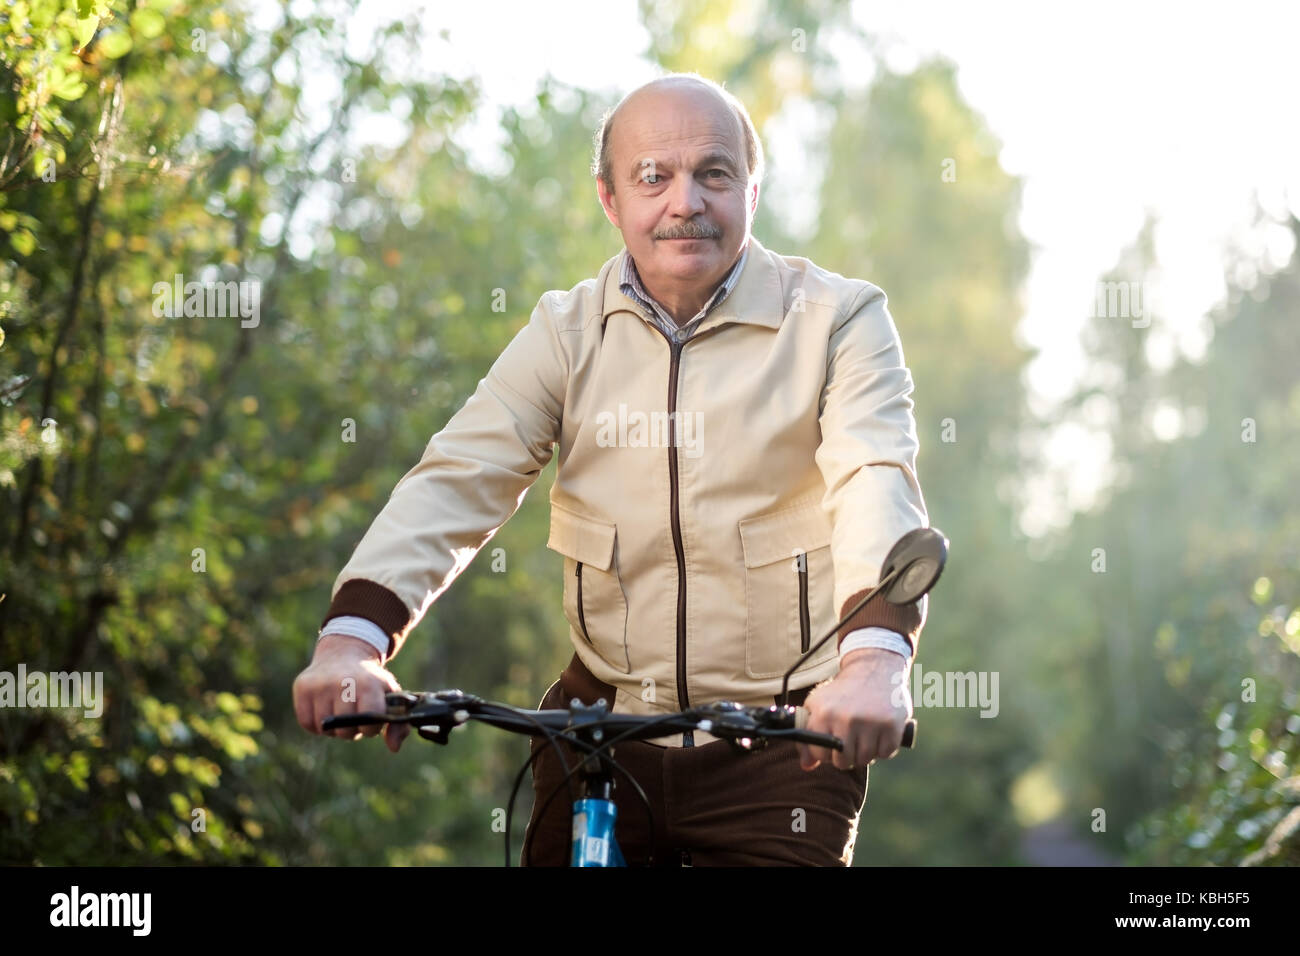 Senior man on cycle ride in countryside Banque D'Images